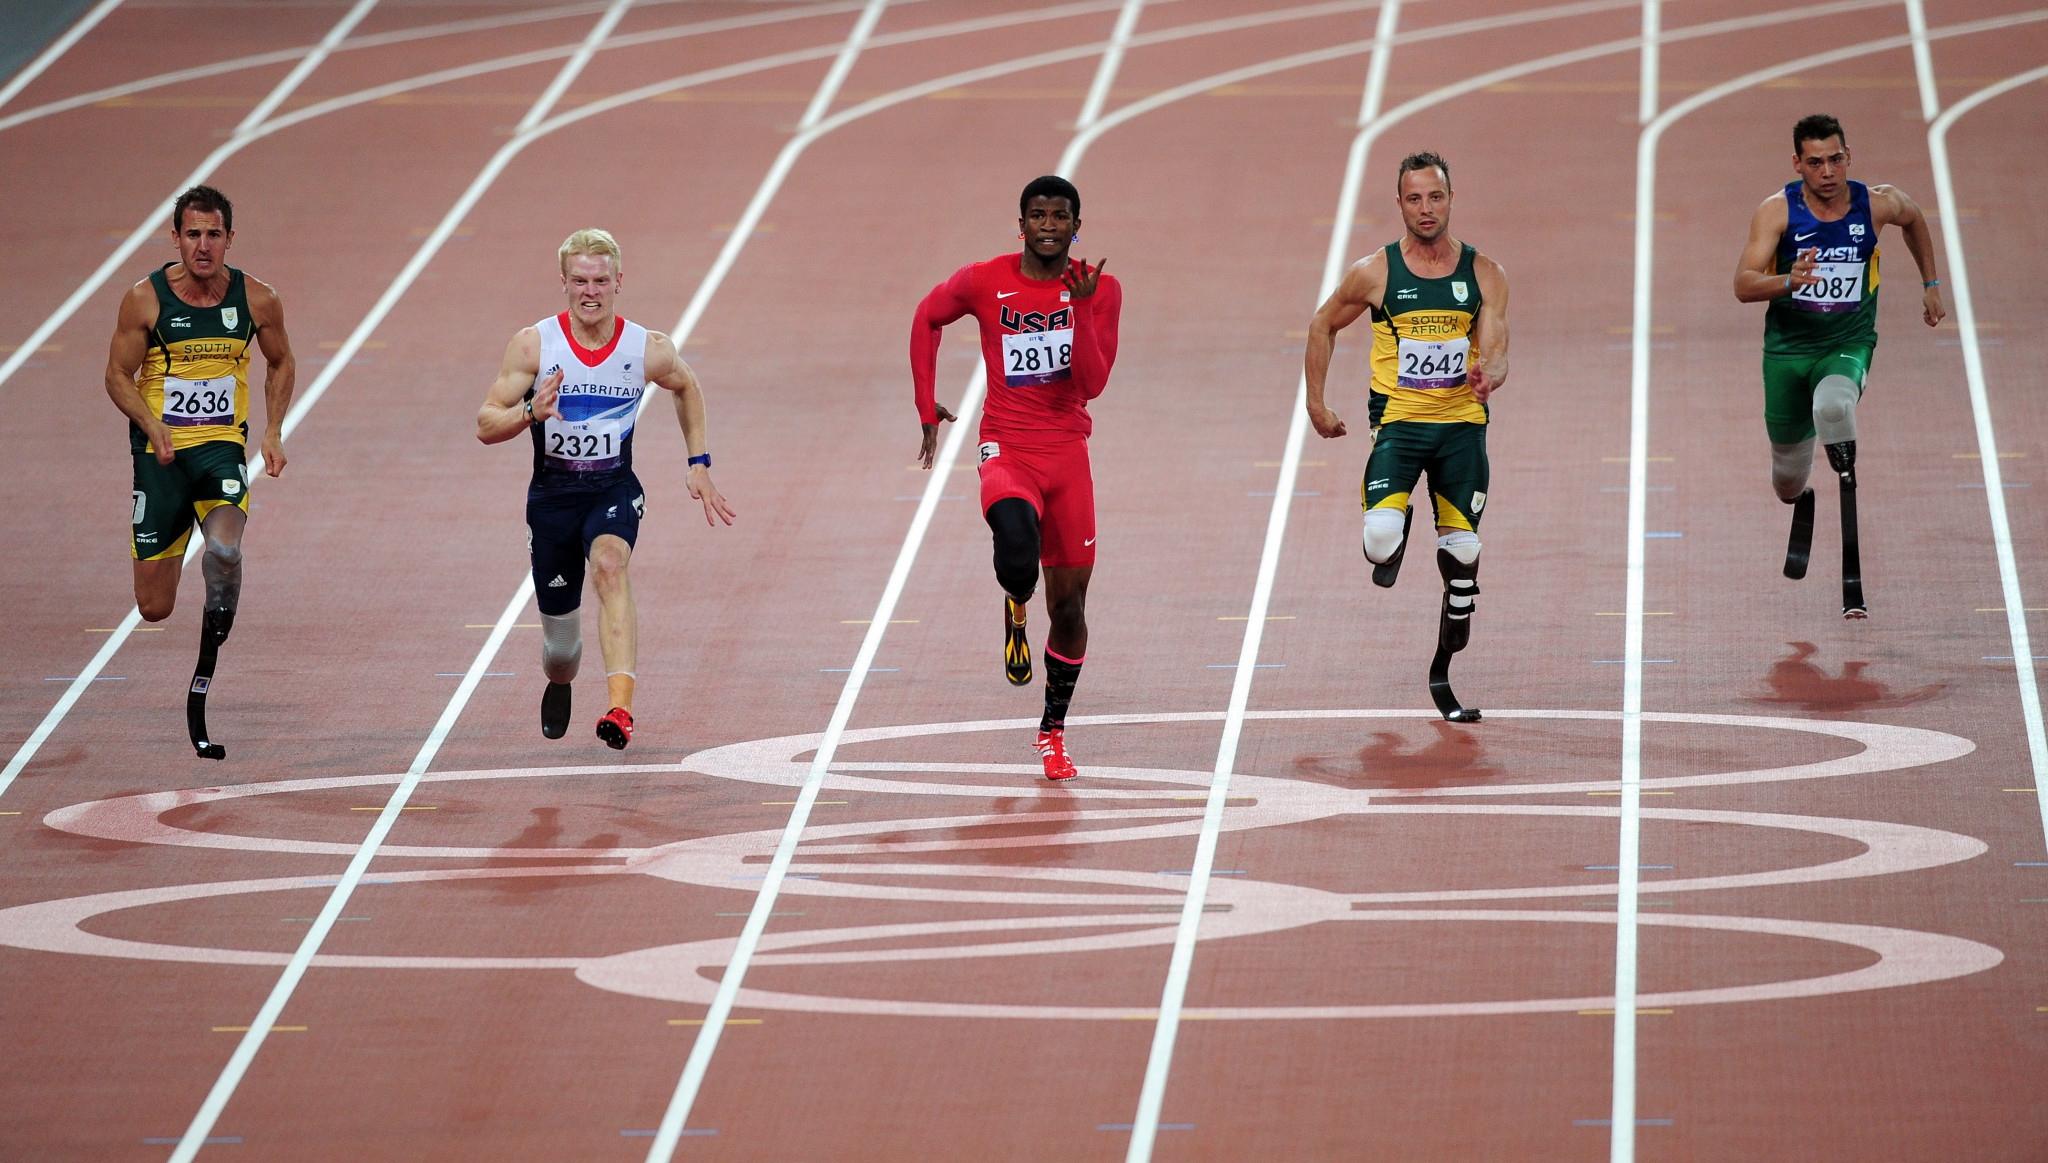 (L-R) Arnu Fourie of South Africa, Jonnie Peacock of Great Britain, Richard Browne of the United States, Oscar Pistorius of South Africa and Alan Oliveira Cardoso Oliveira of Brazil compete in the Men's 100m - T44 Final on day 8 of the London 2012 Paralympic Games ©Getty Images